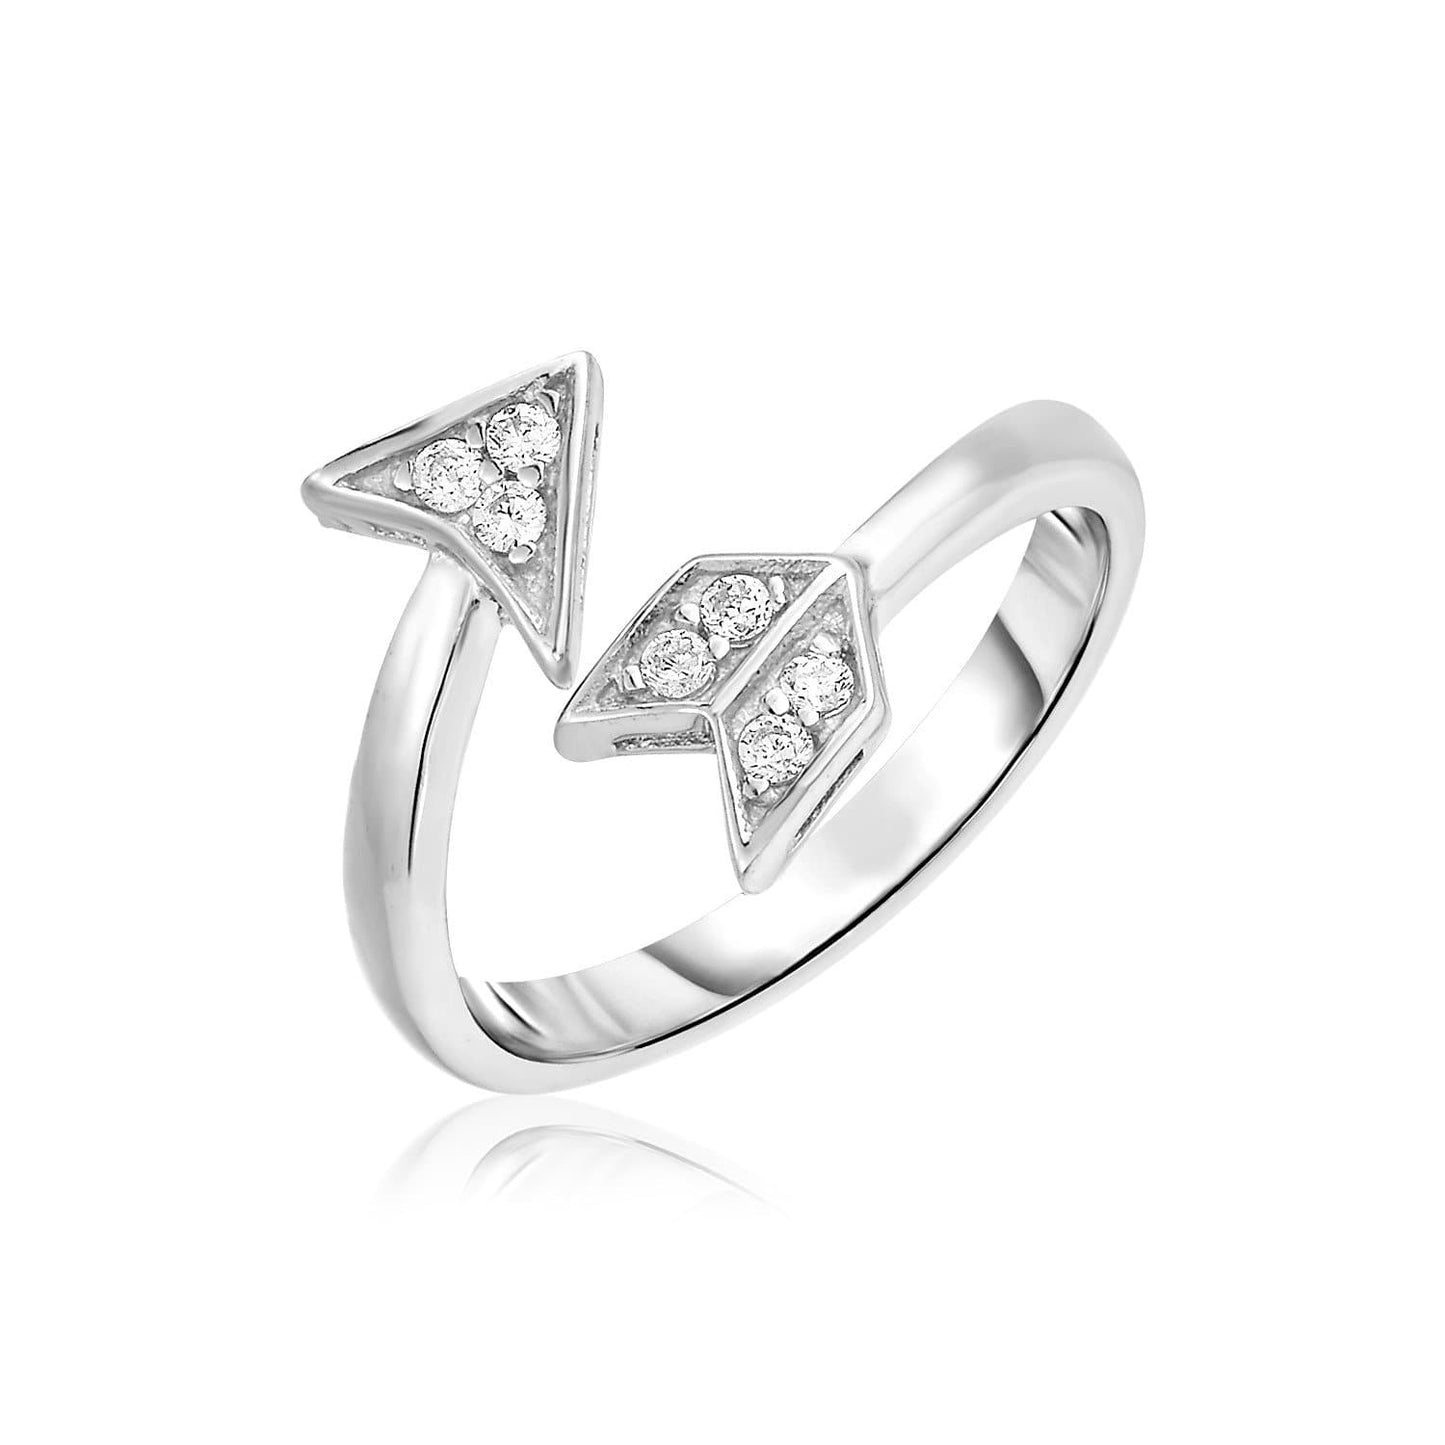 Sterling Silver Arrow Bypass Toe Ring